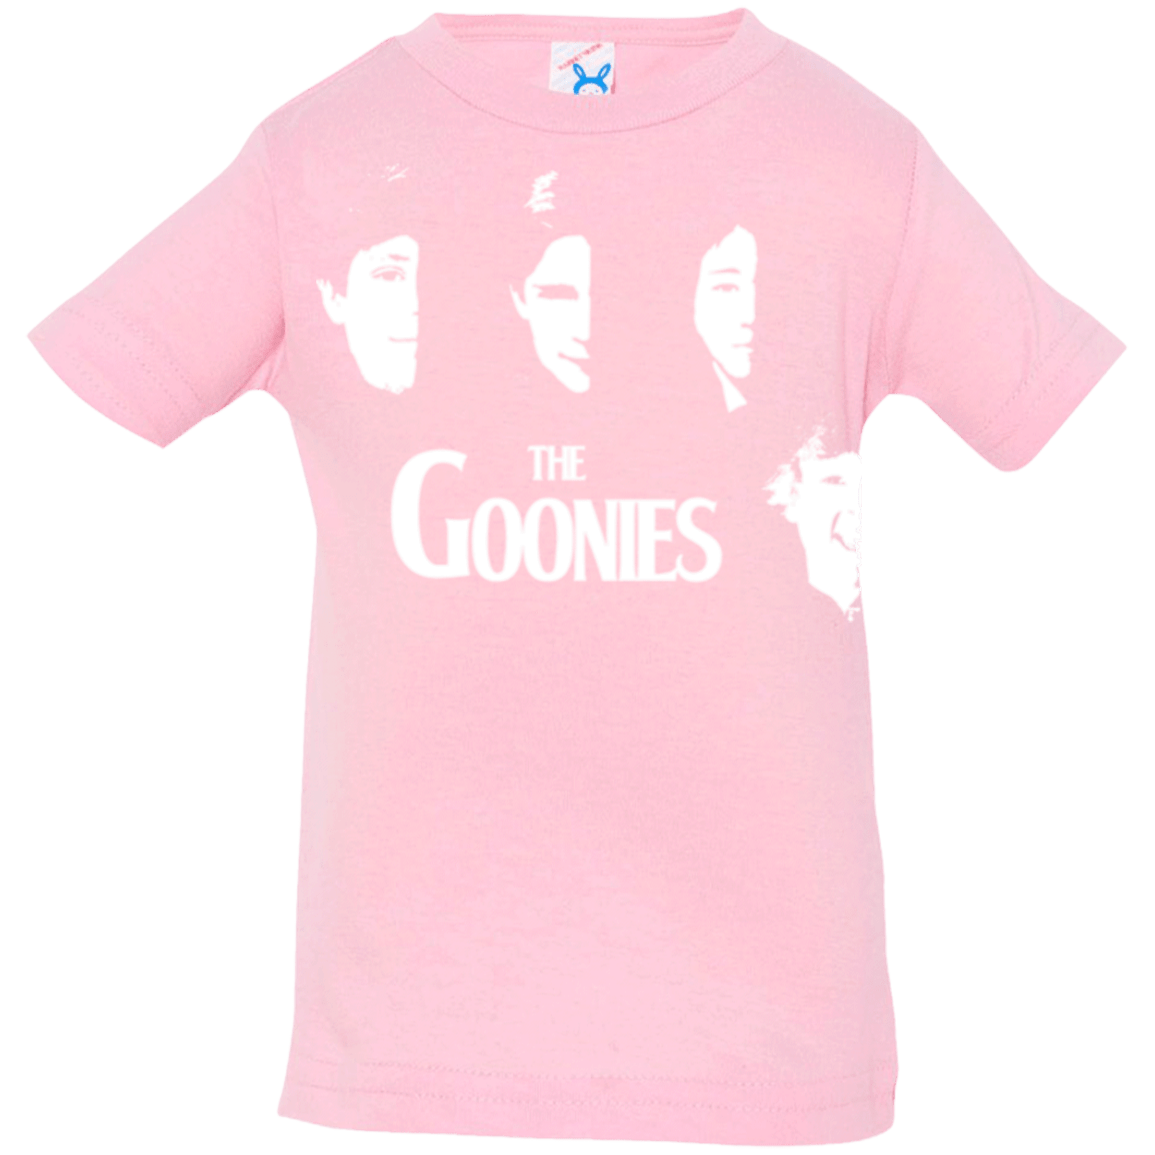 T-Shirts Pink / 6 Months The Goonies Infant Premium T-Shirt